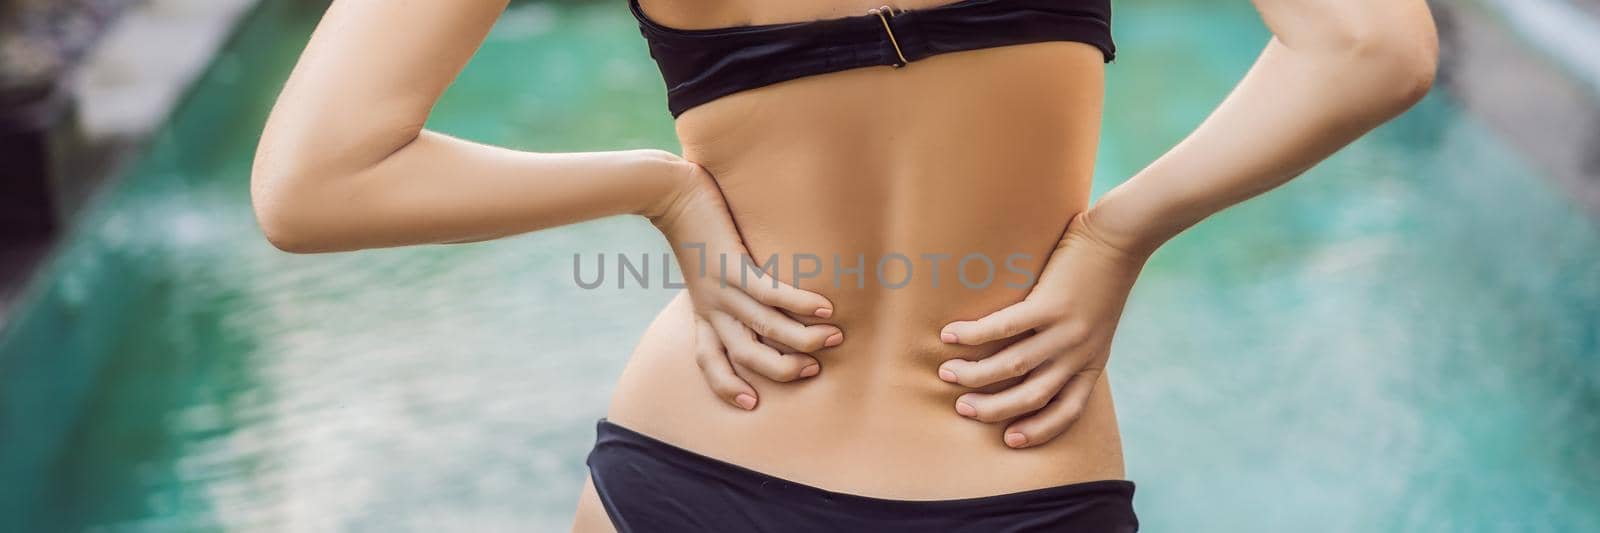 Women's back hurts against the backdrop of the pool. Pool helps with back pain. BANNER, LONG FORMAT